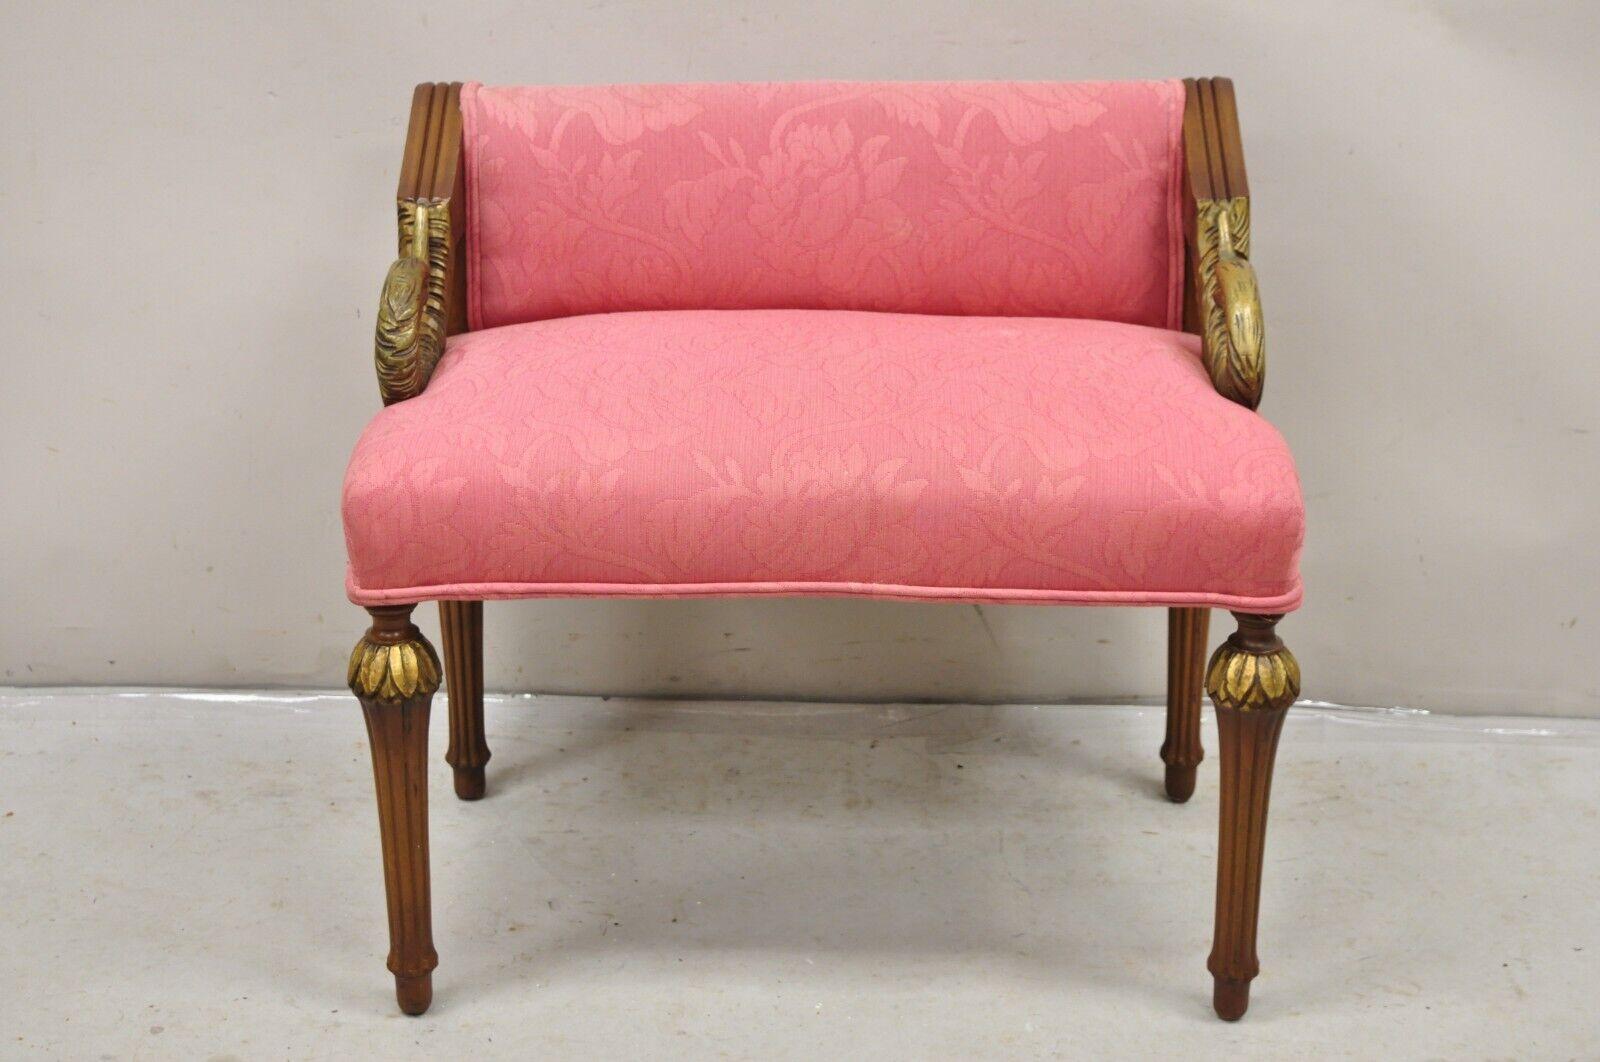 Vintage French Louis XVI Style Pink Vanity Chair Bench Seat w/ Swan Carved Arms 4